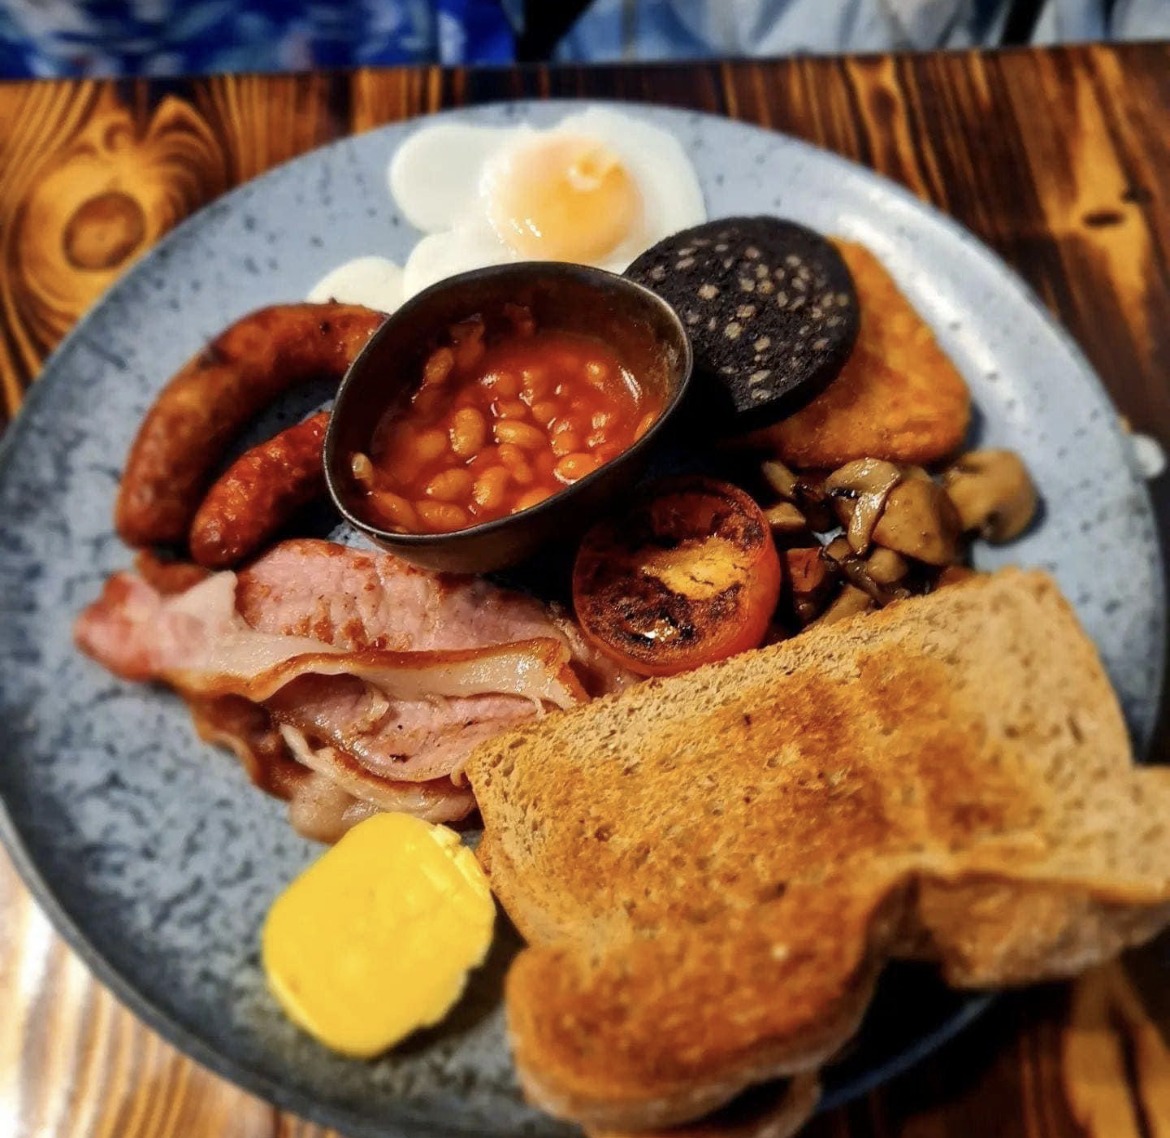 A full English is a popular item on the menu